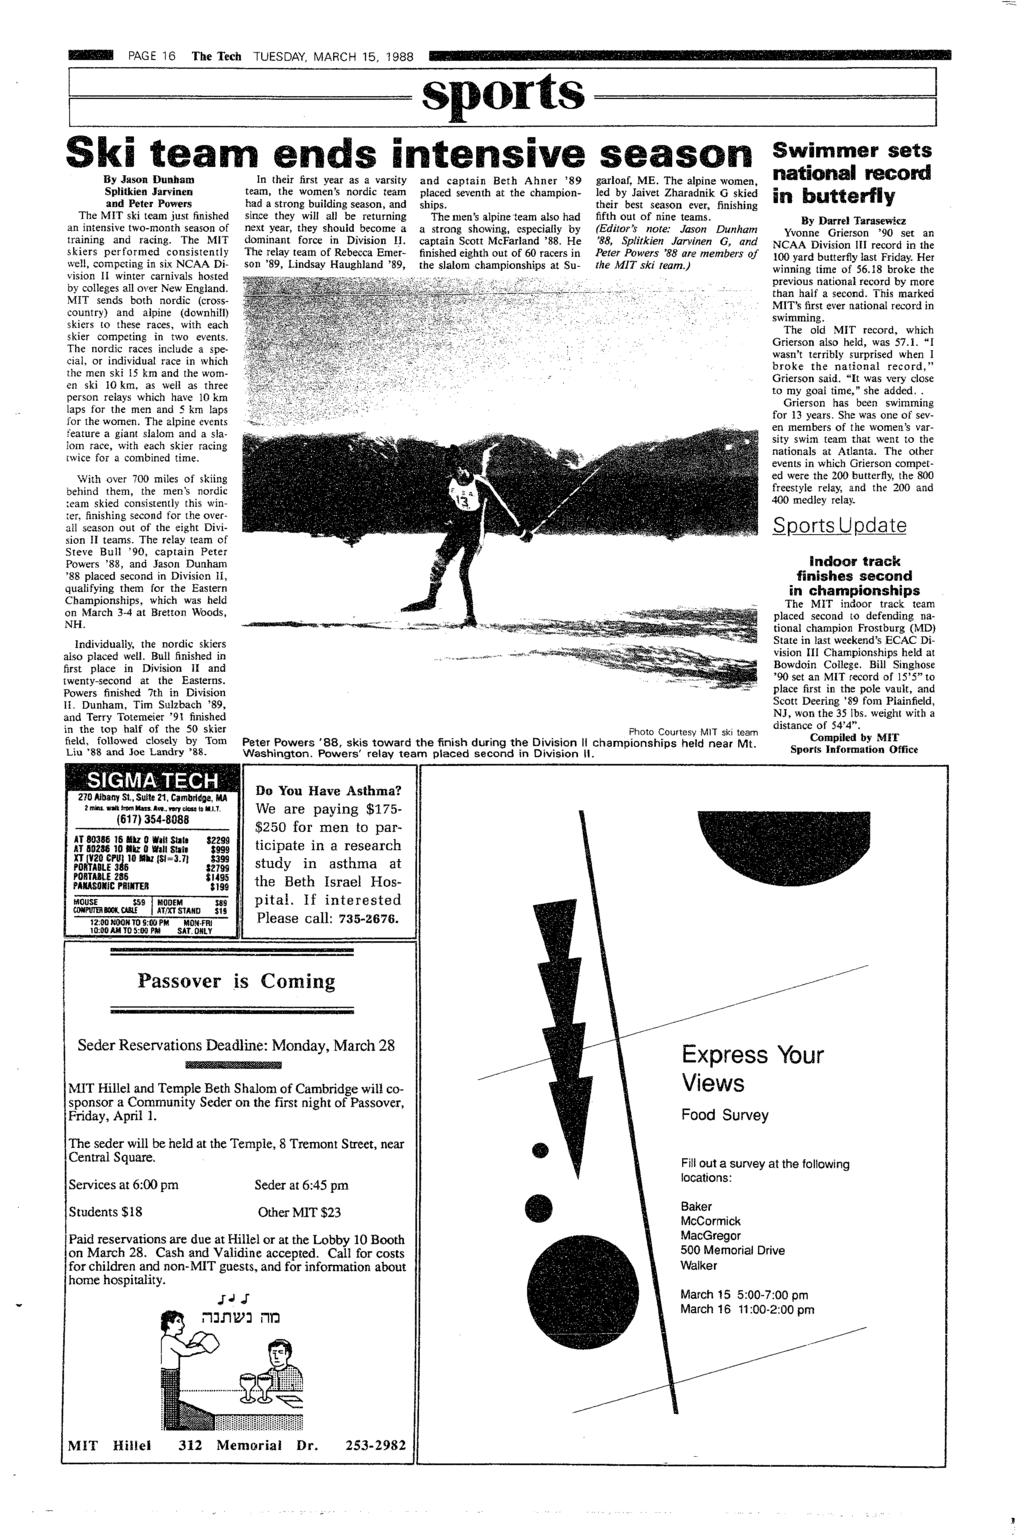 _E~Blg PAGE 16 The Tech TUESDAY, MARCH 15, 1988 ~sa~~p~aa~-~asq Afu Sk tean By Jason Dunham Spltken Jarvnen and Peter Powers The MT sk team just fnshed an ntensve two-month season of tranng and racng.